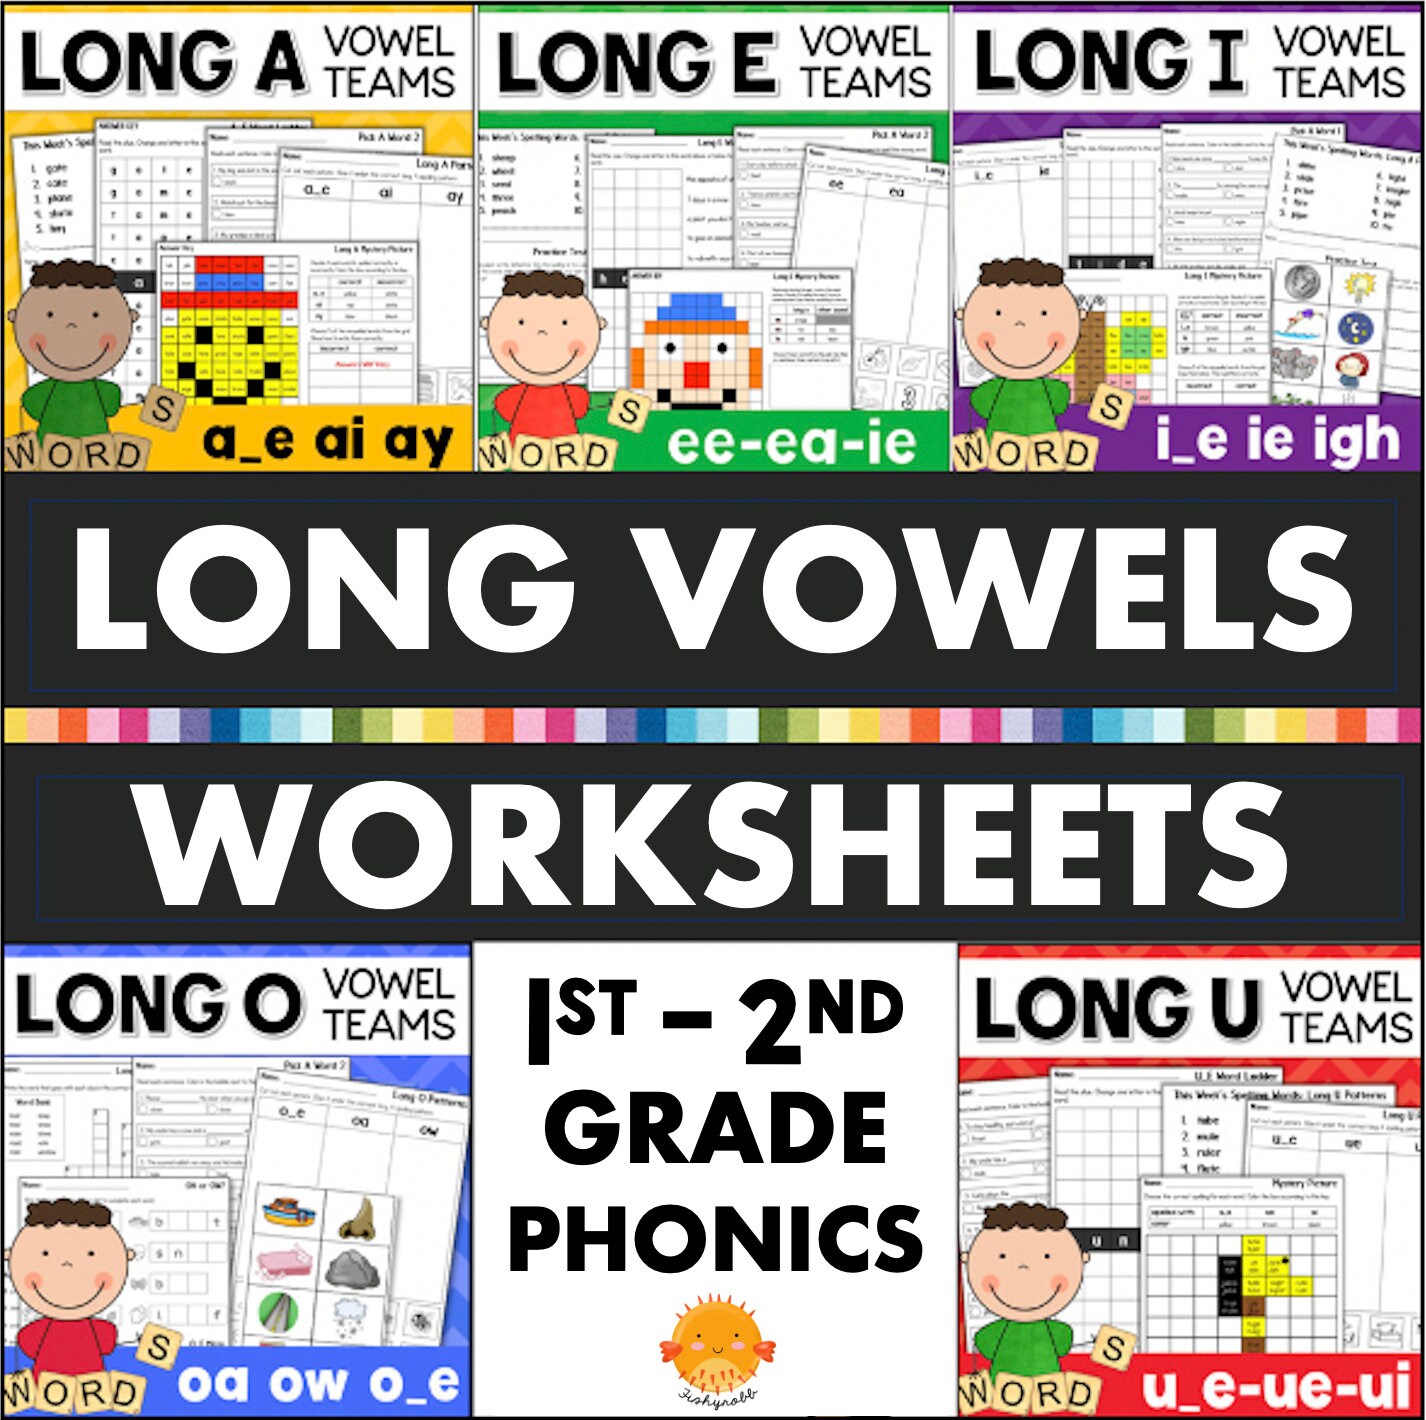 Word Work Mat with Skill-Specific Word Lists - Vowel Sounds